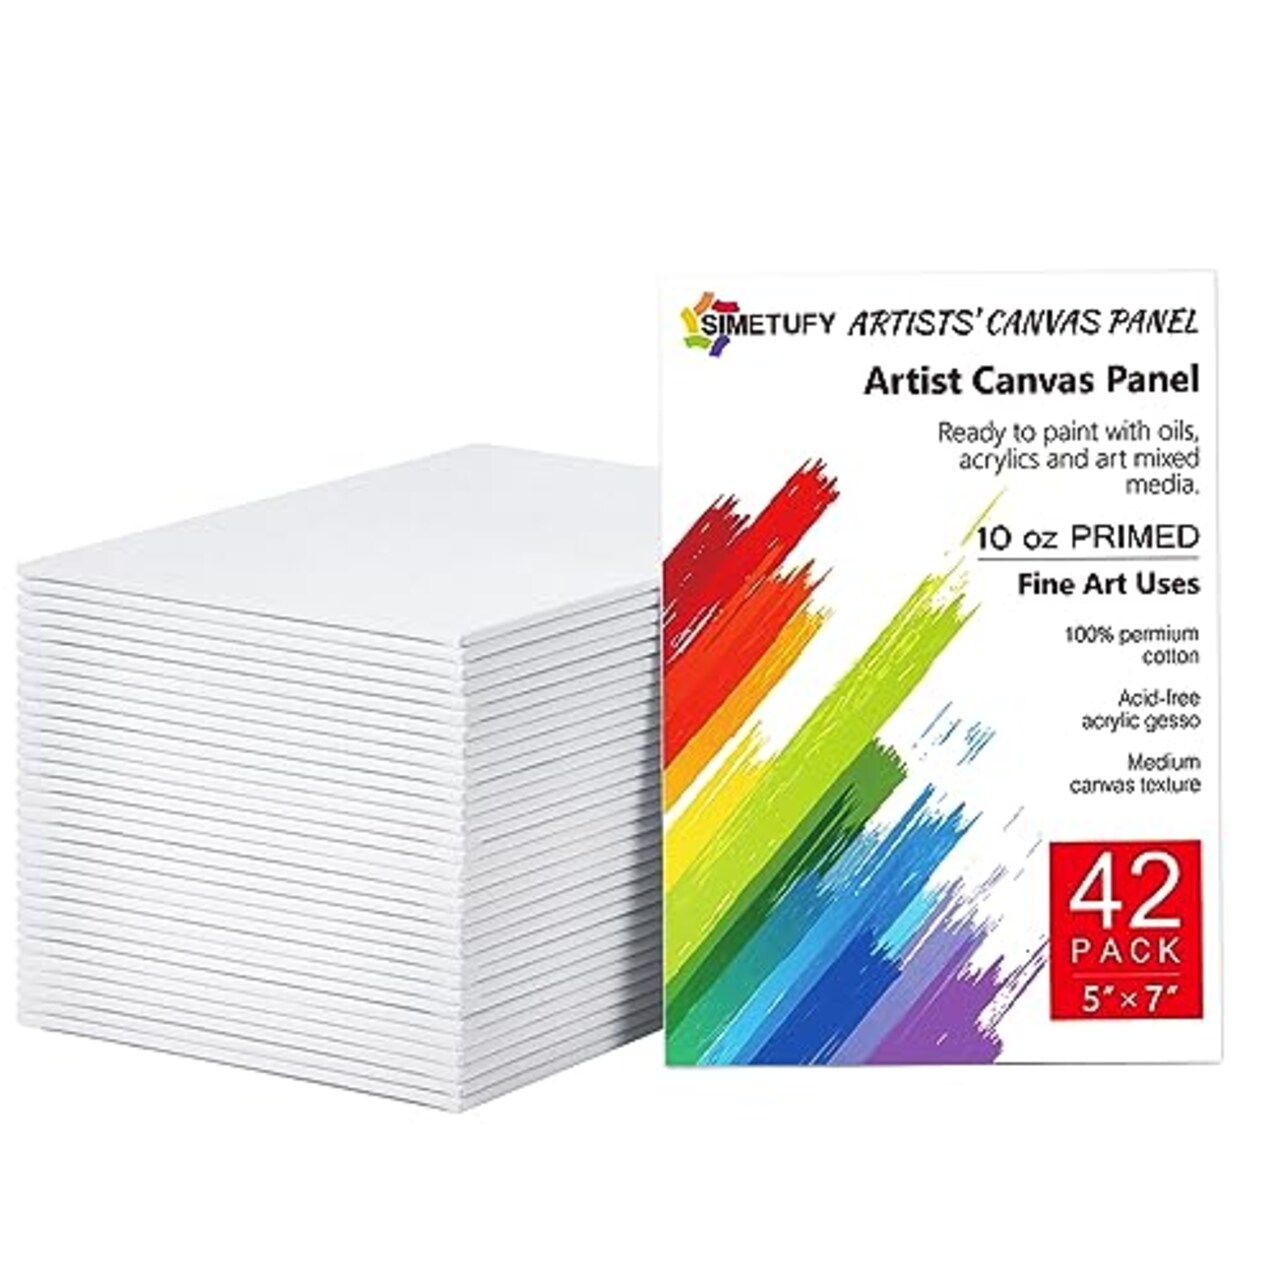 42 Pack 5x7 Inch Canvases for Painting,10 oz Double Primed Acid